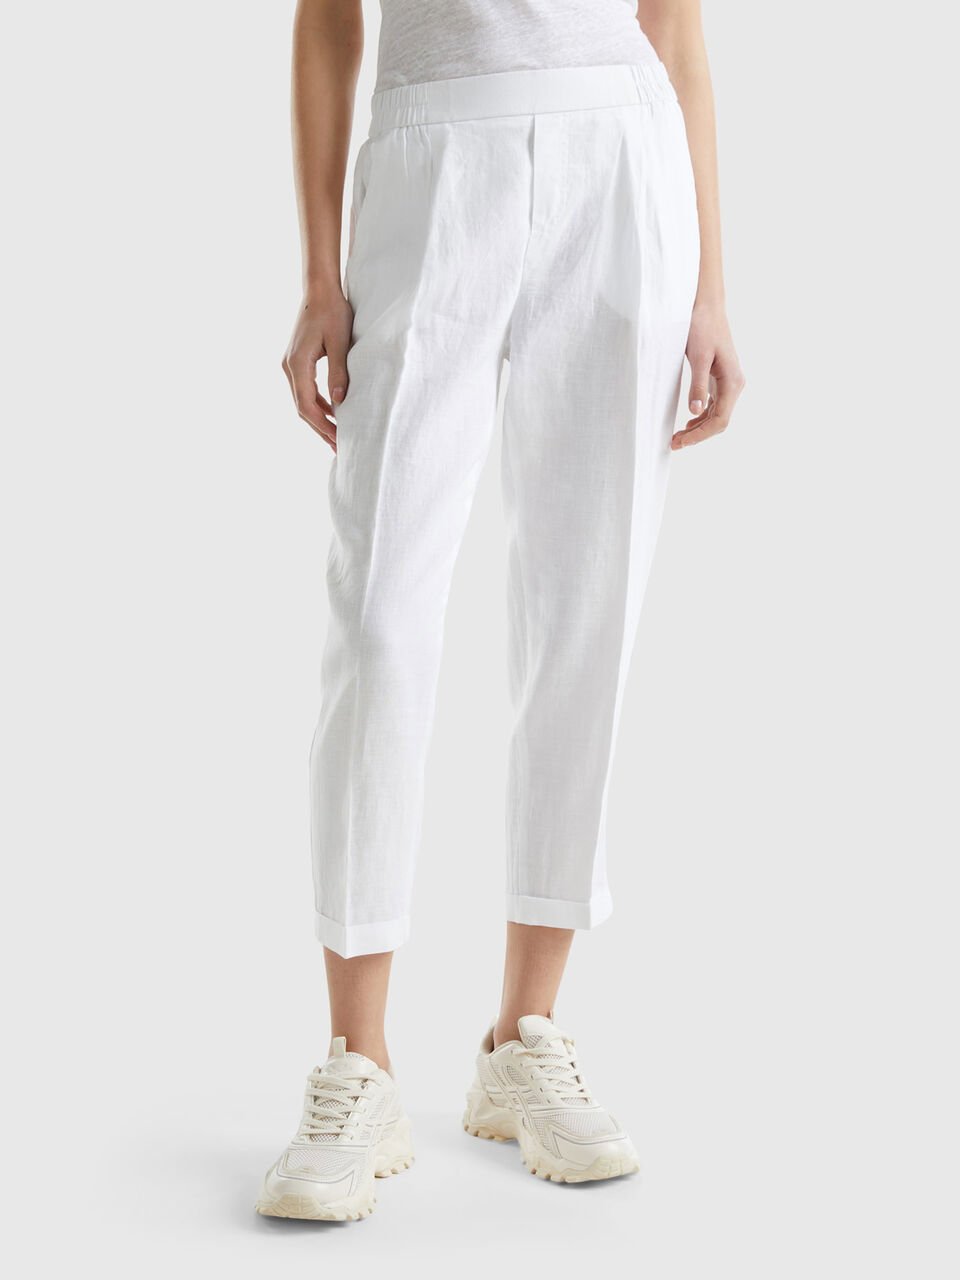 Cropped trousers in 100% linen - White